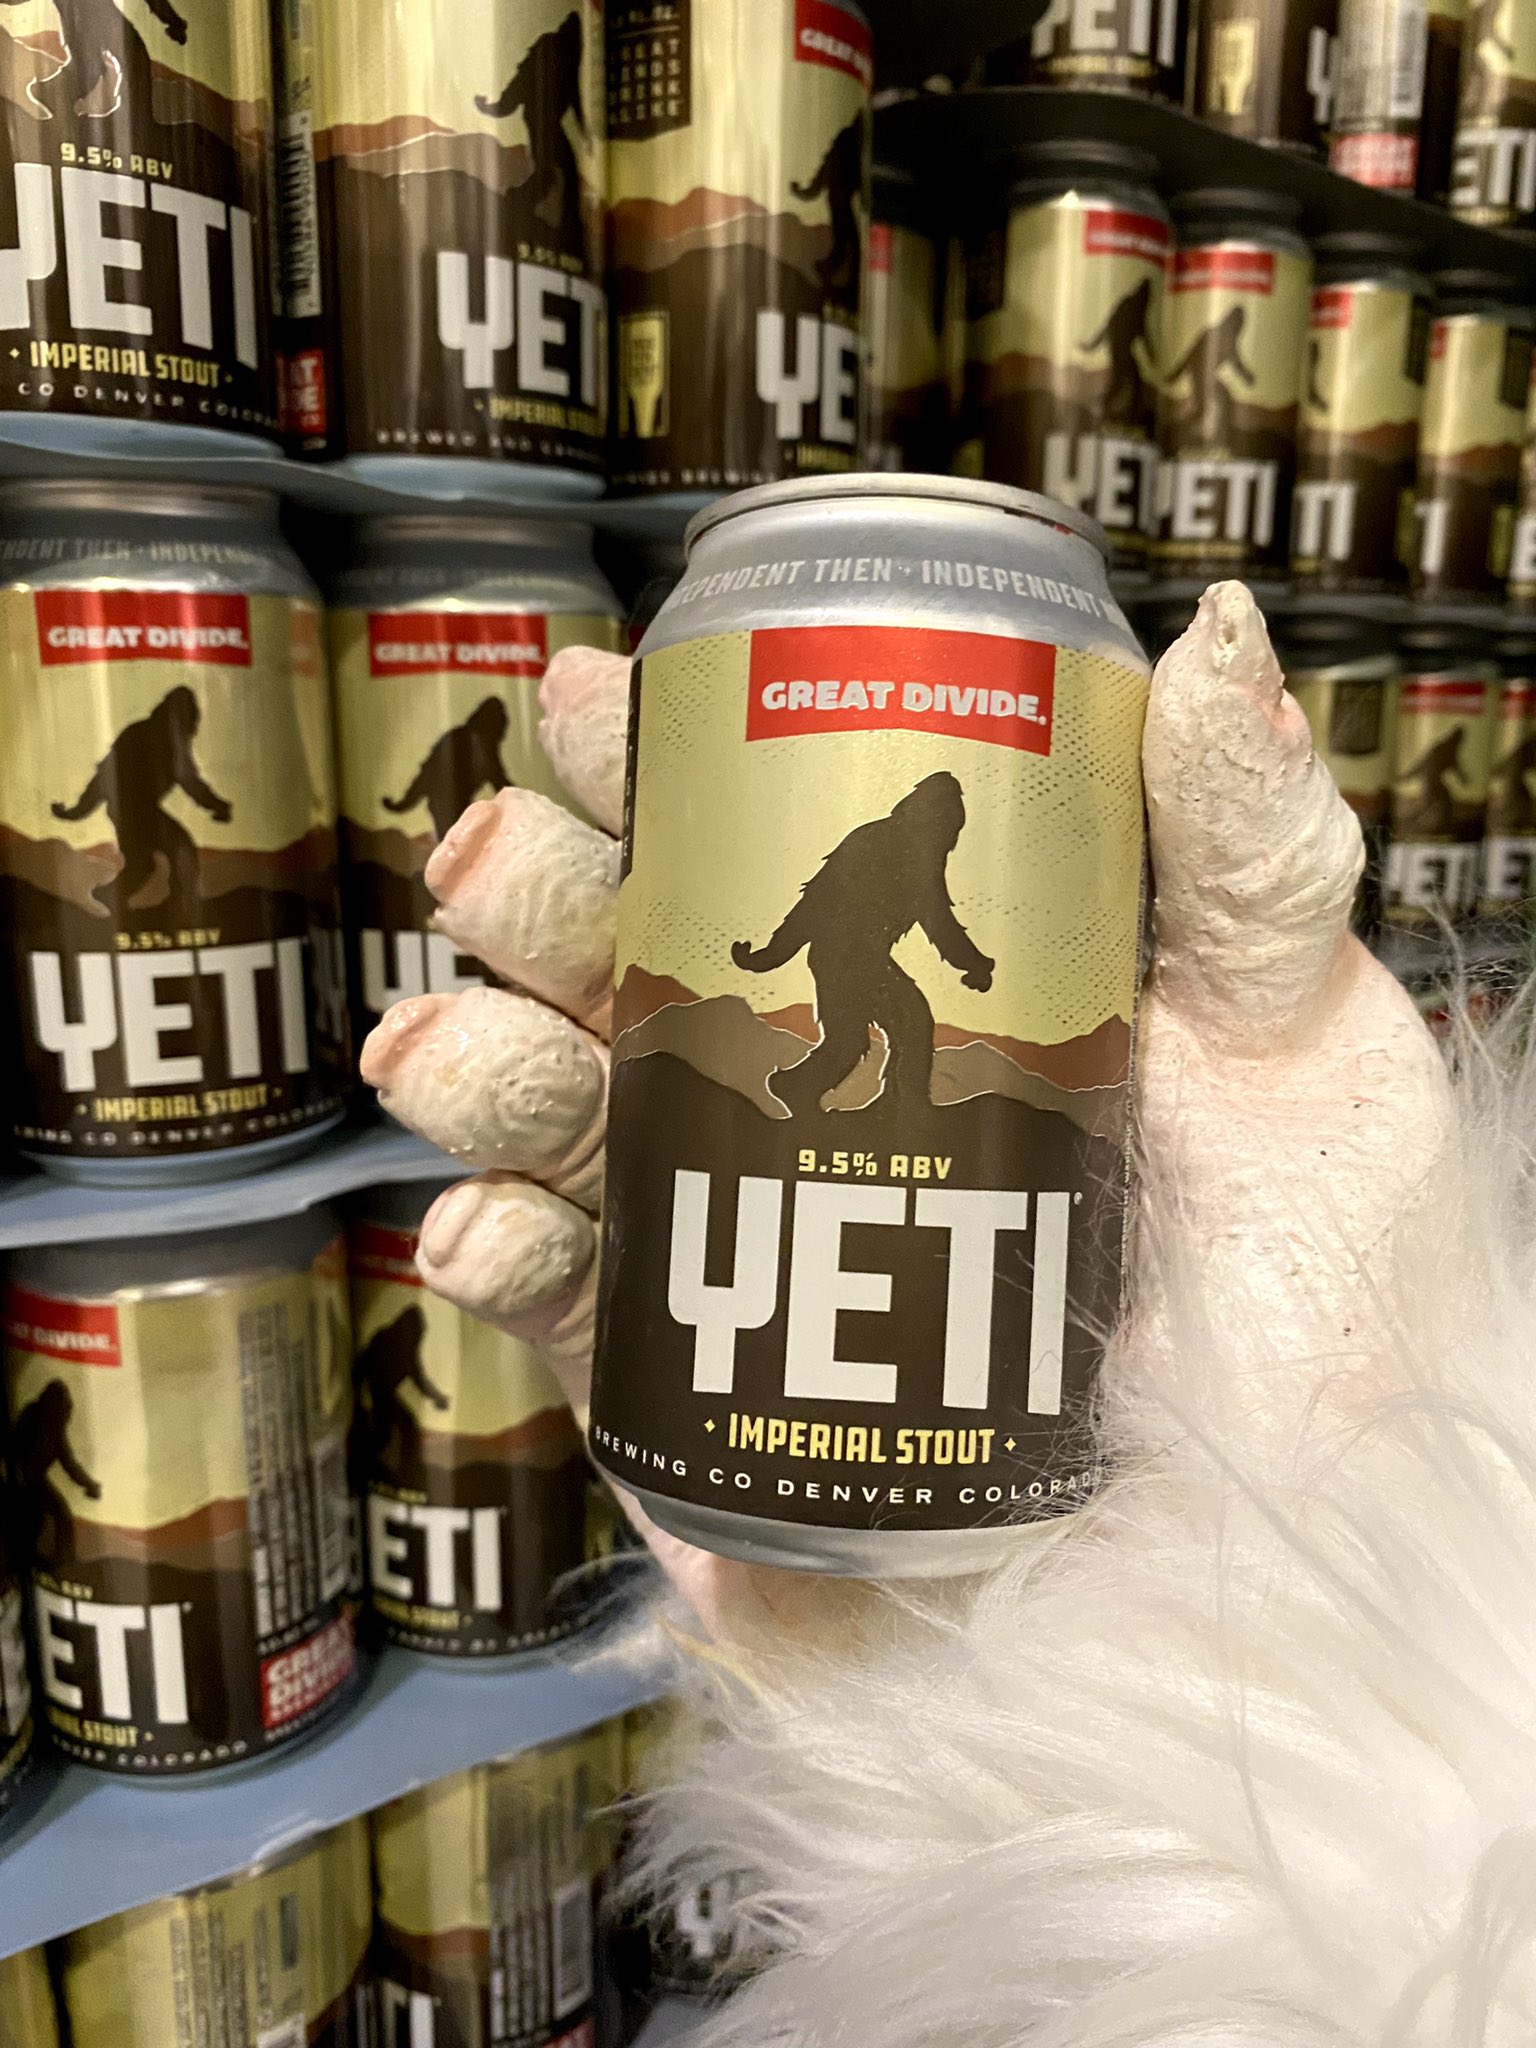 Great Divide Pack of Yetis